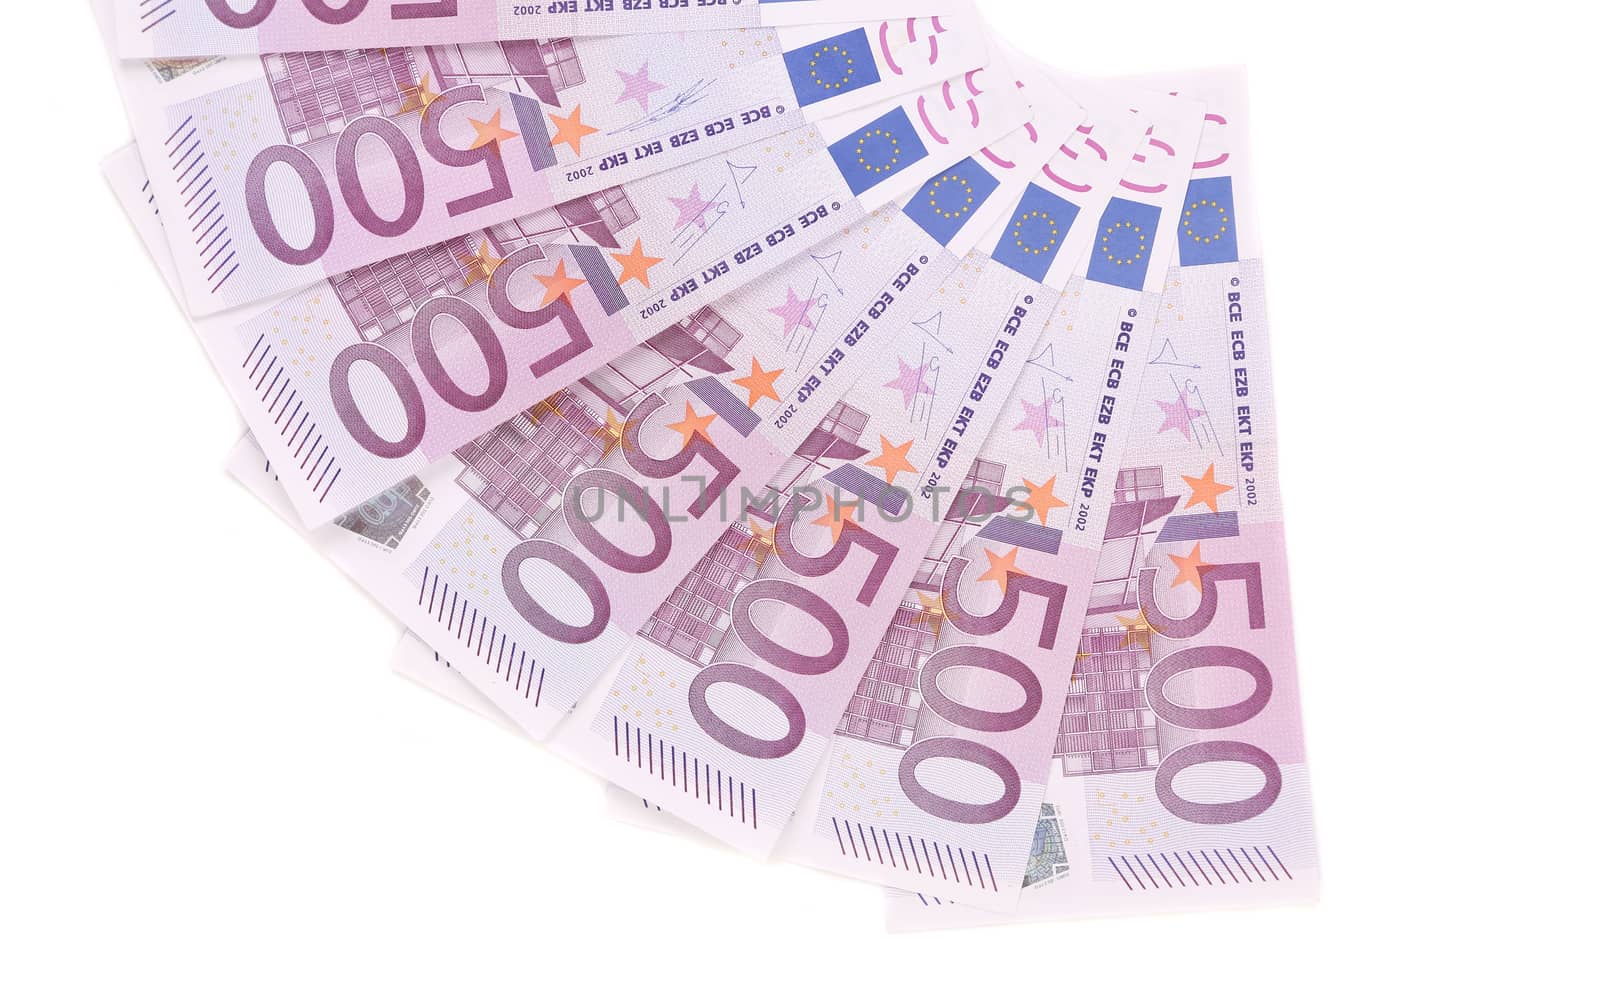 Banknotes on 500 euros laid out by a fan. Isolated on a white background.